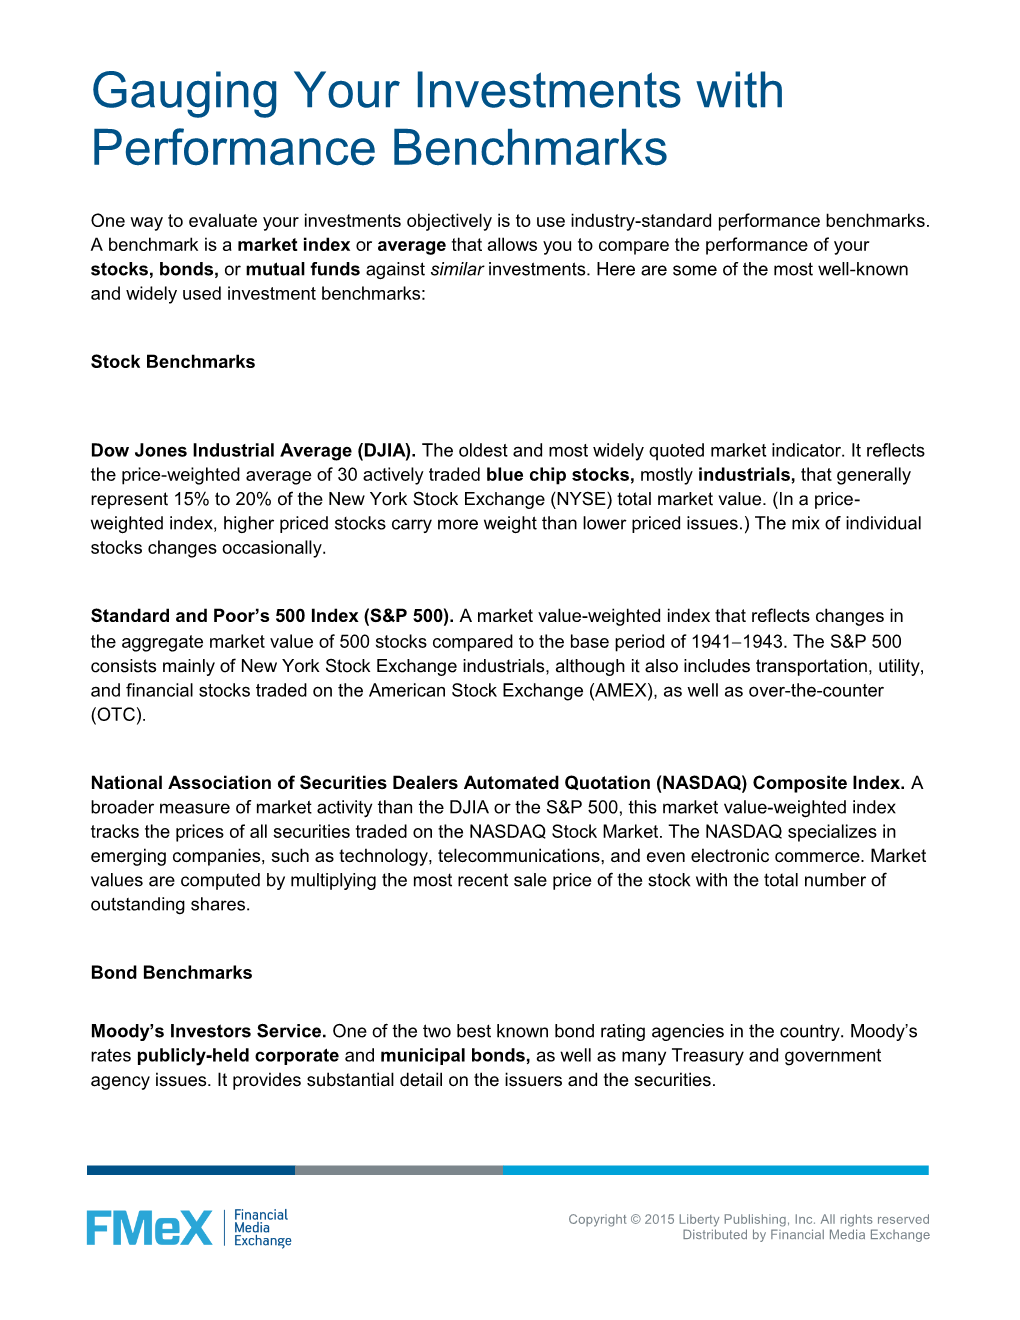 Gauging Your Investments with Performance Benchmarks